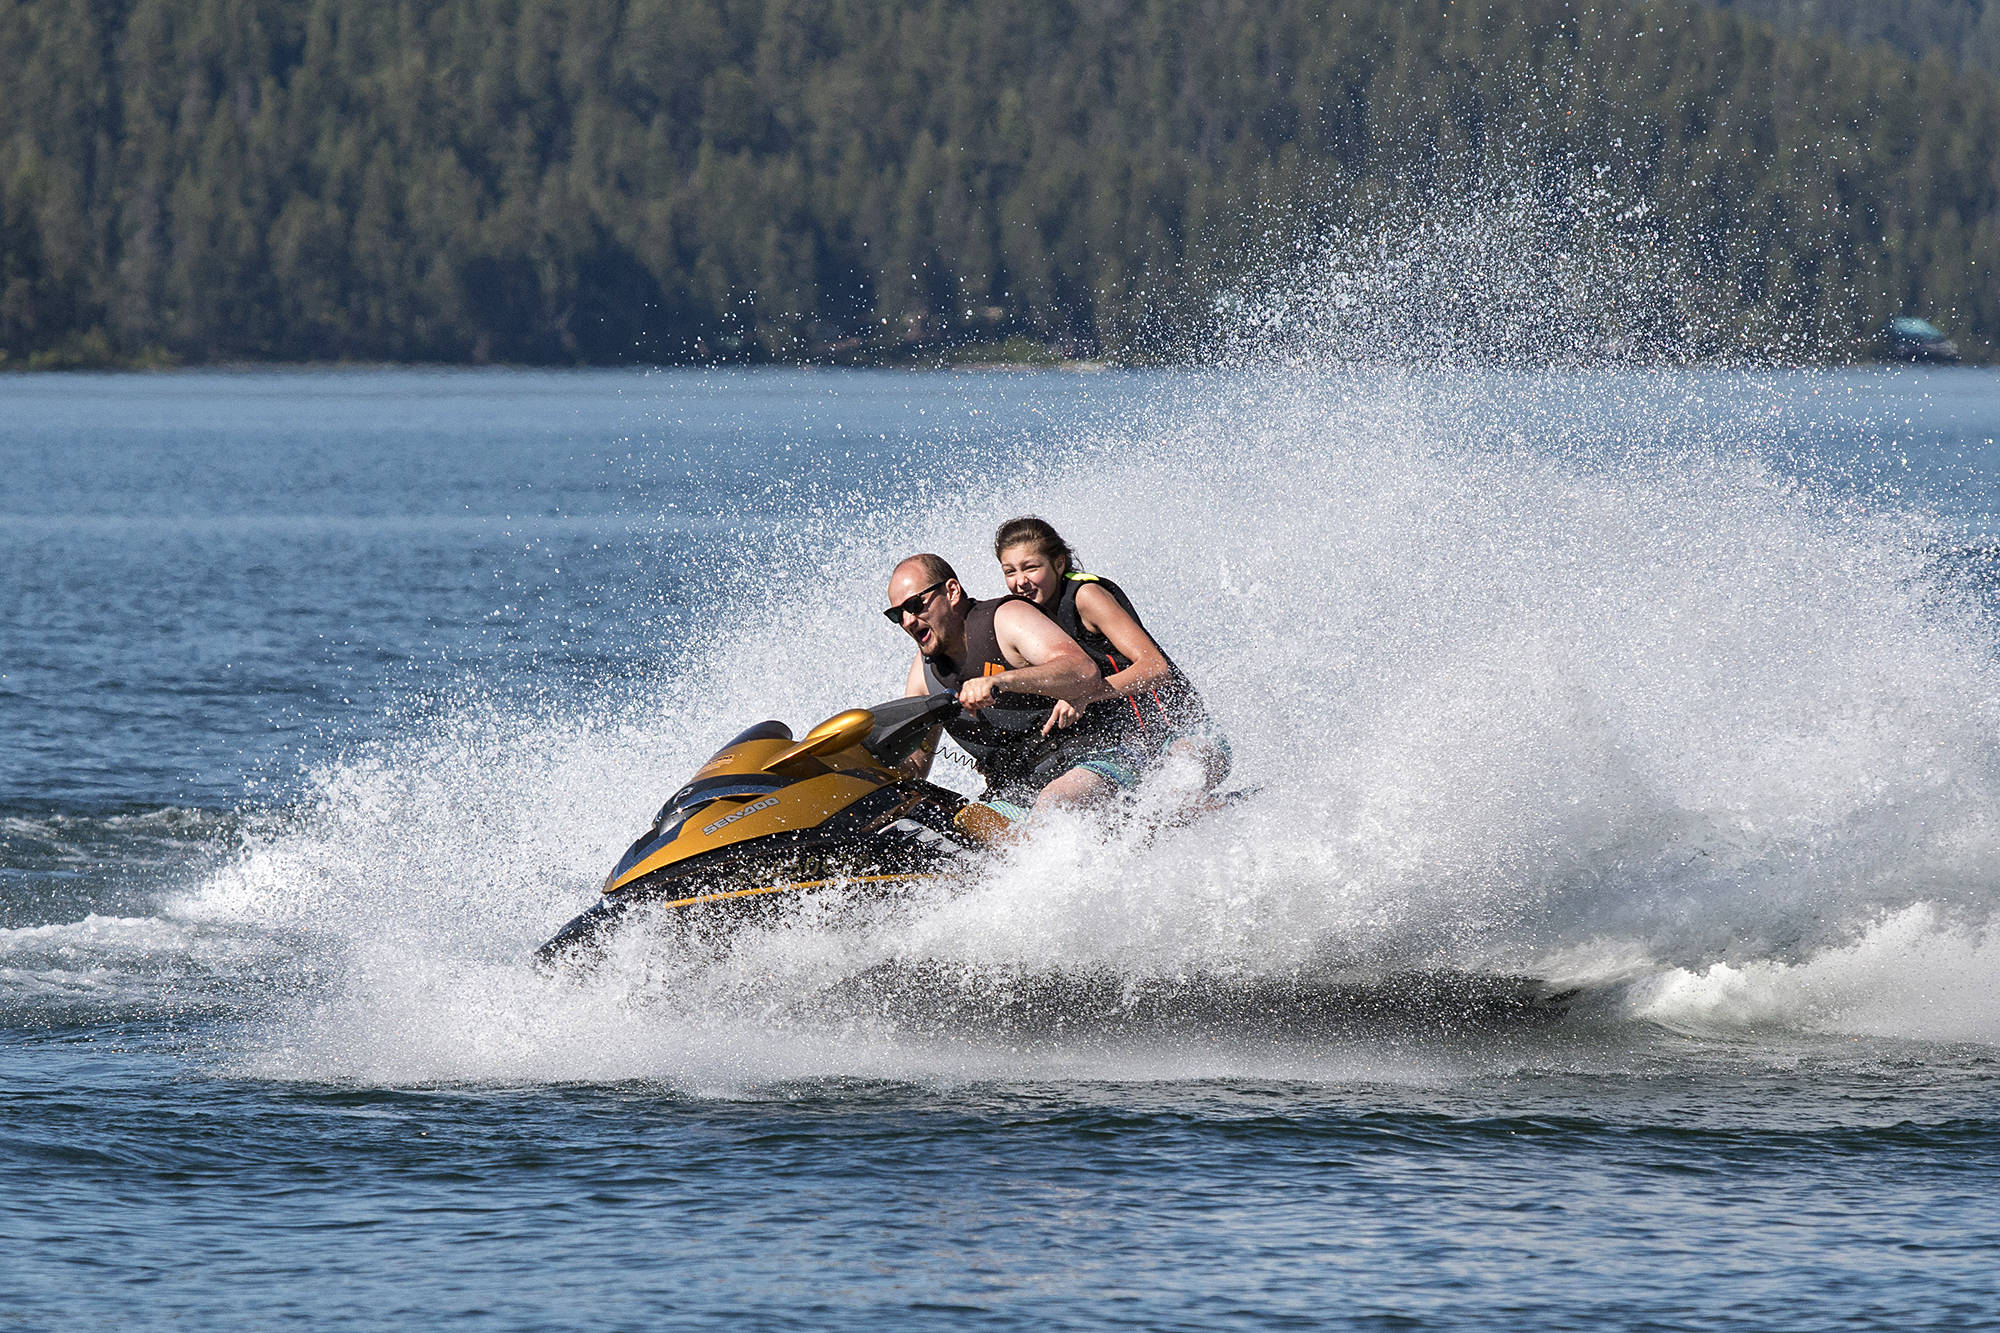 On Monday, the final day of the May long weekend, Harri Herter from Kamloops takes turns and gives friends thrilling jetski rides on little Shuswap Lake. - Image credit: Rick Koch photo.